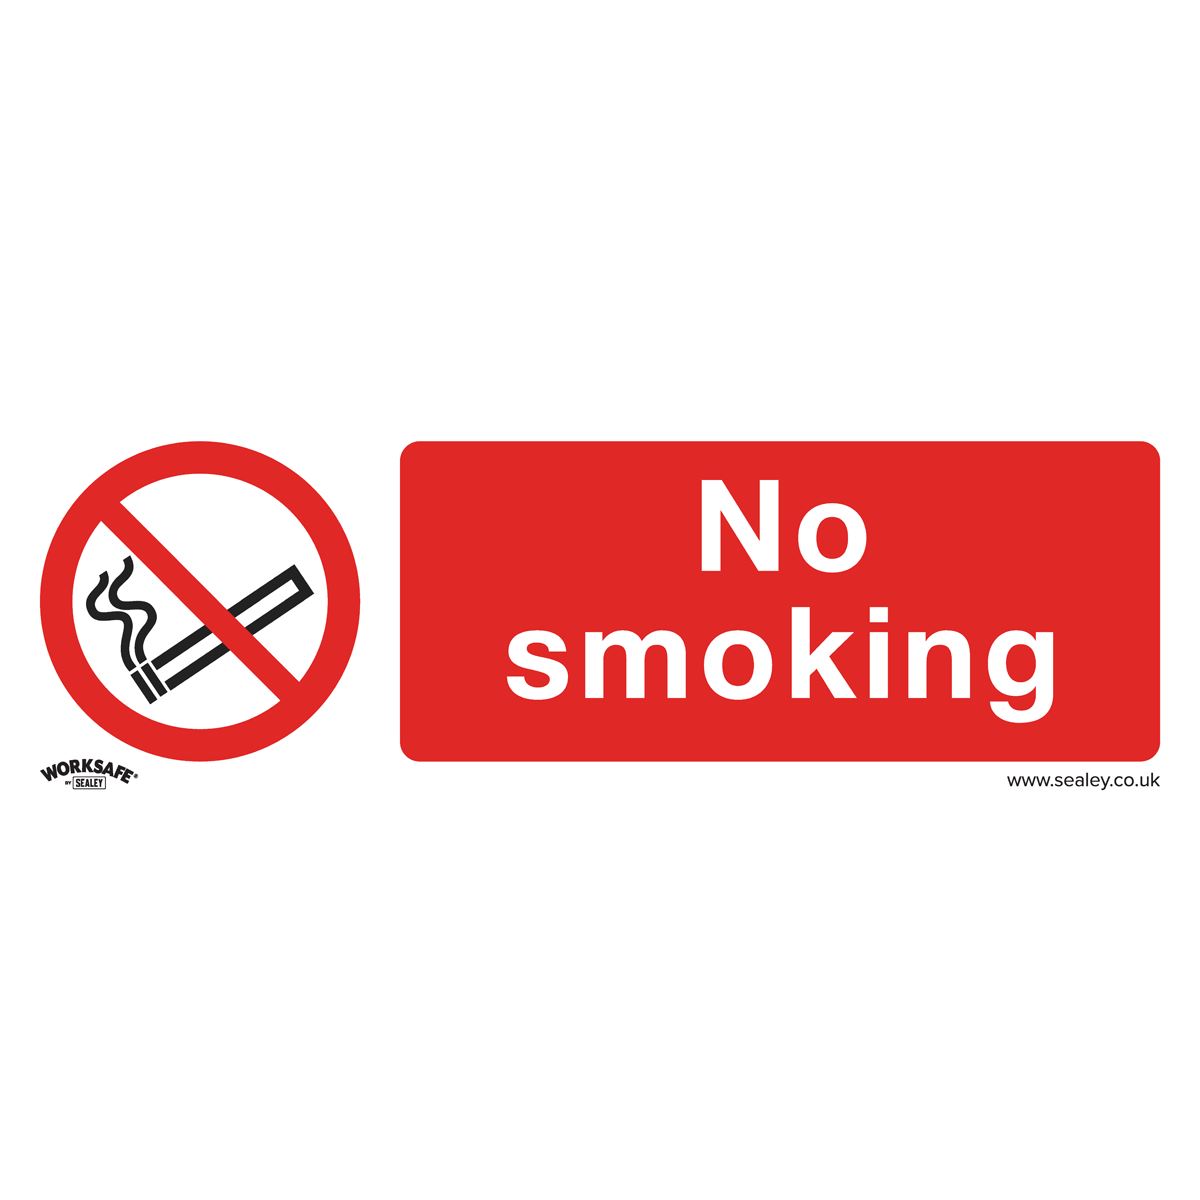 Worksafe by Sealey Prohibition Safety Sign - No Smoking - Rigid Plastic - Pack of 10